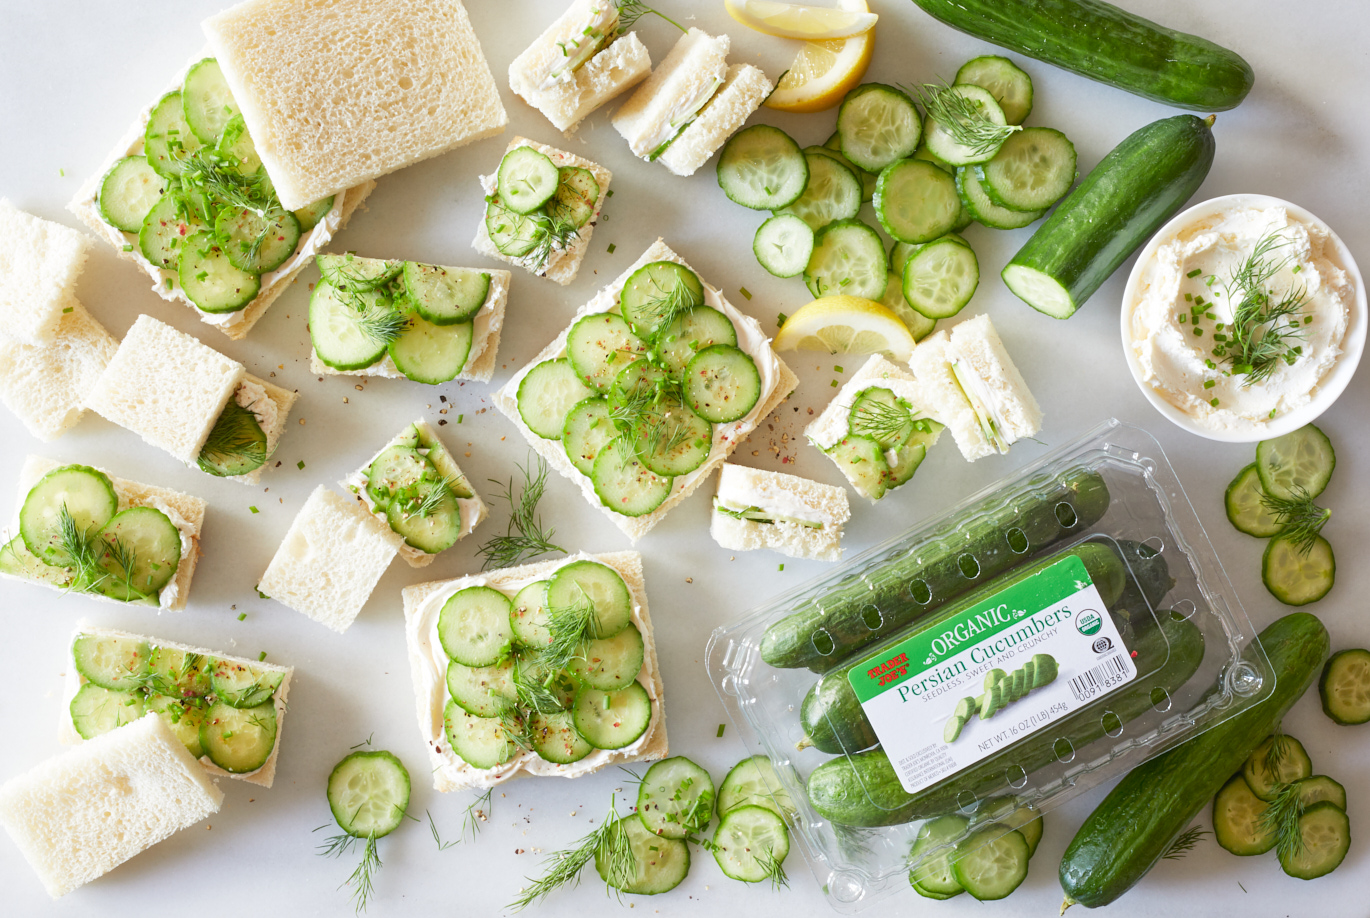 Trader Joe's Organic Persian Cucumbers; shown used in cubed cucumber sandwiches, with white bread, cream cheese, chives and dill